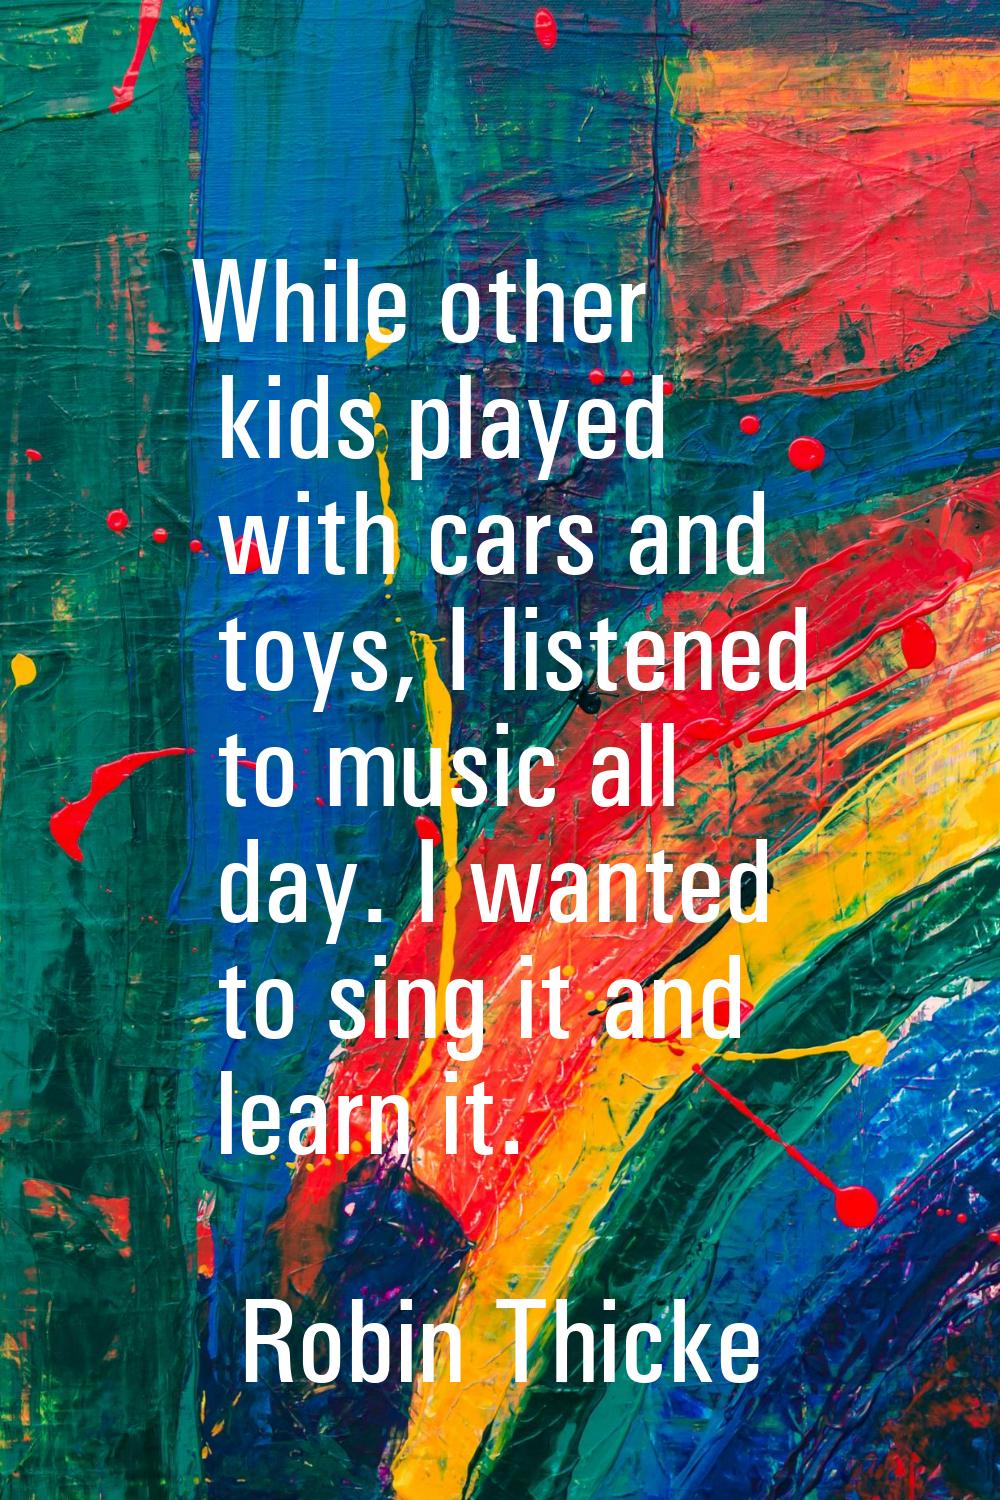 While other kids played with cars and toys, I listened to music all day. I wanted to sing it and le